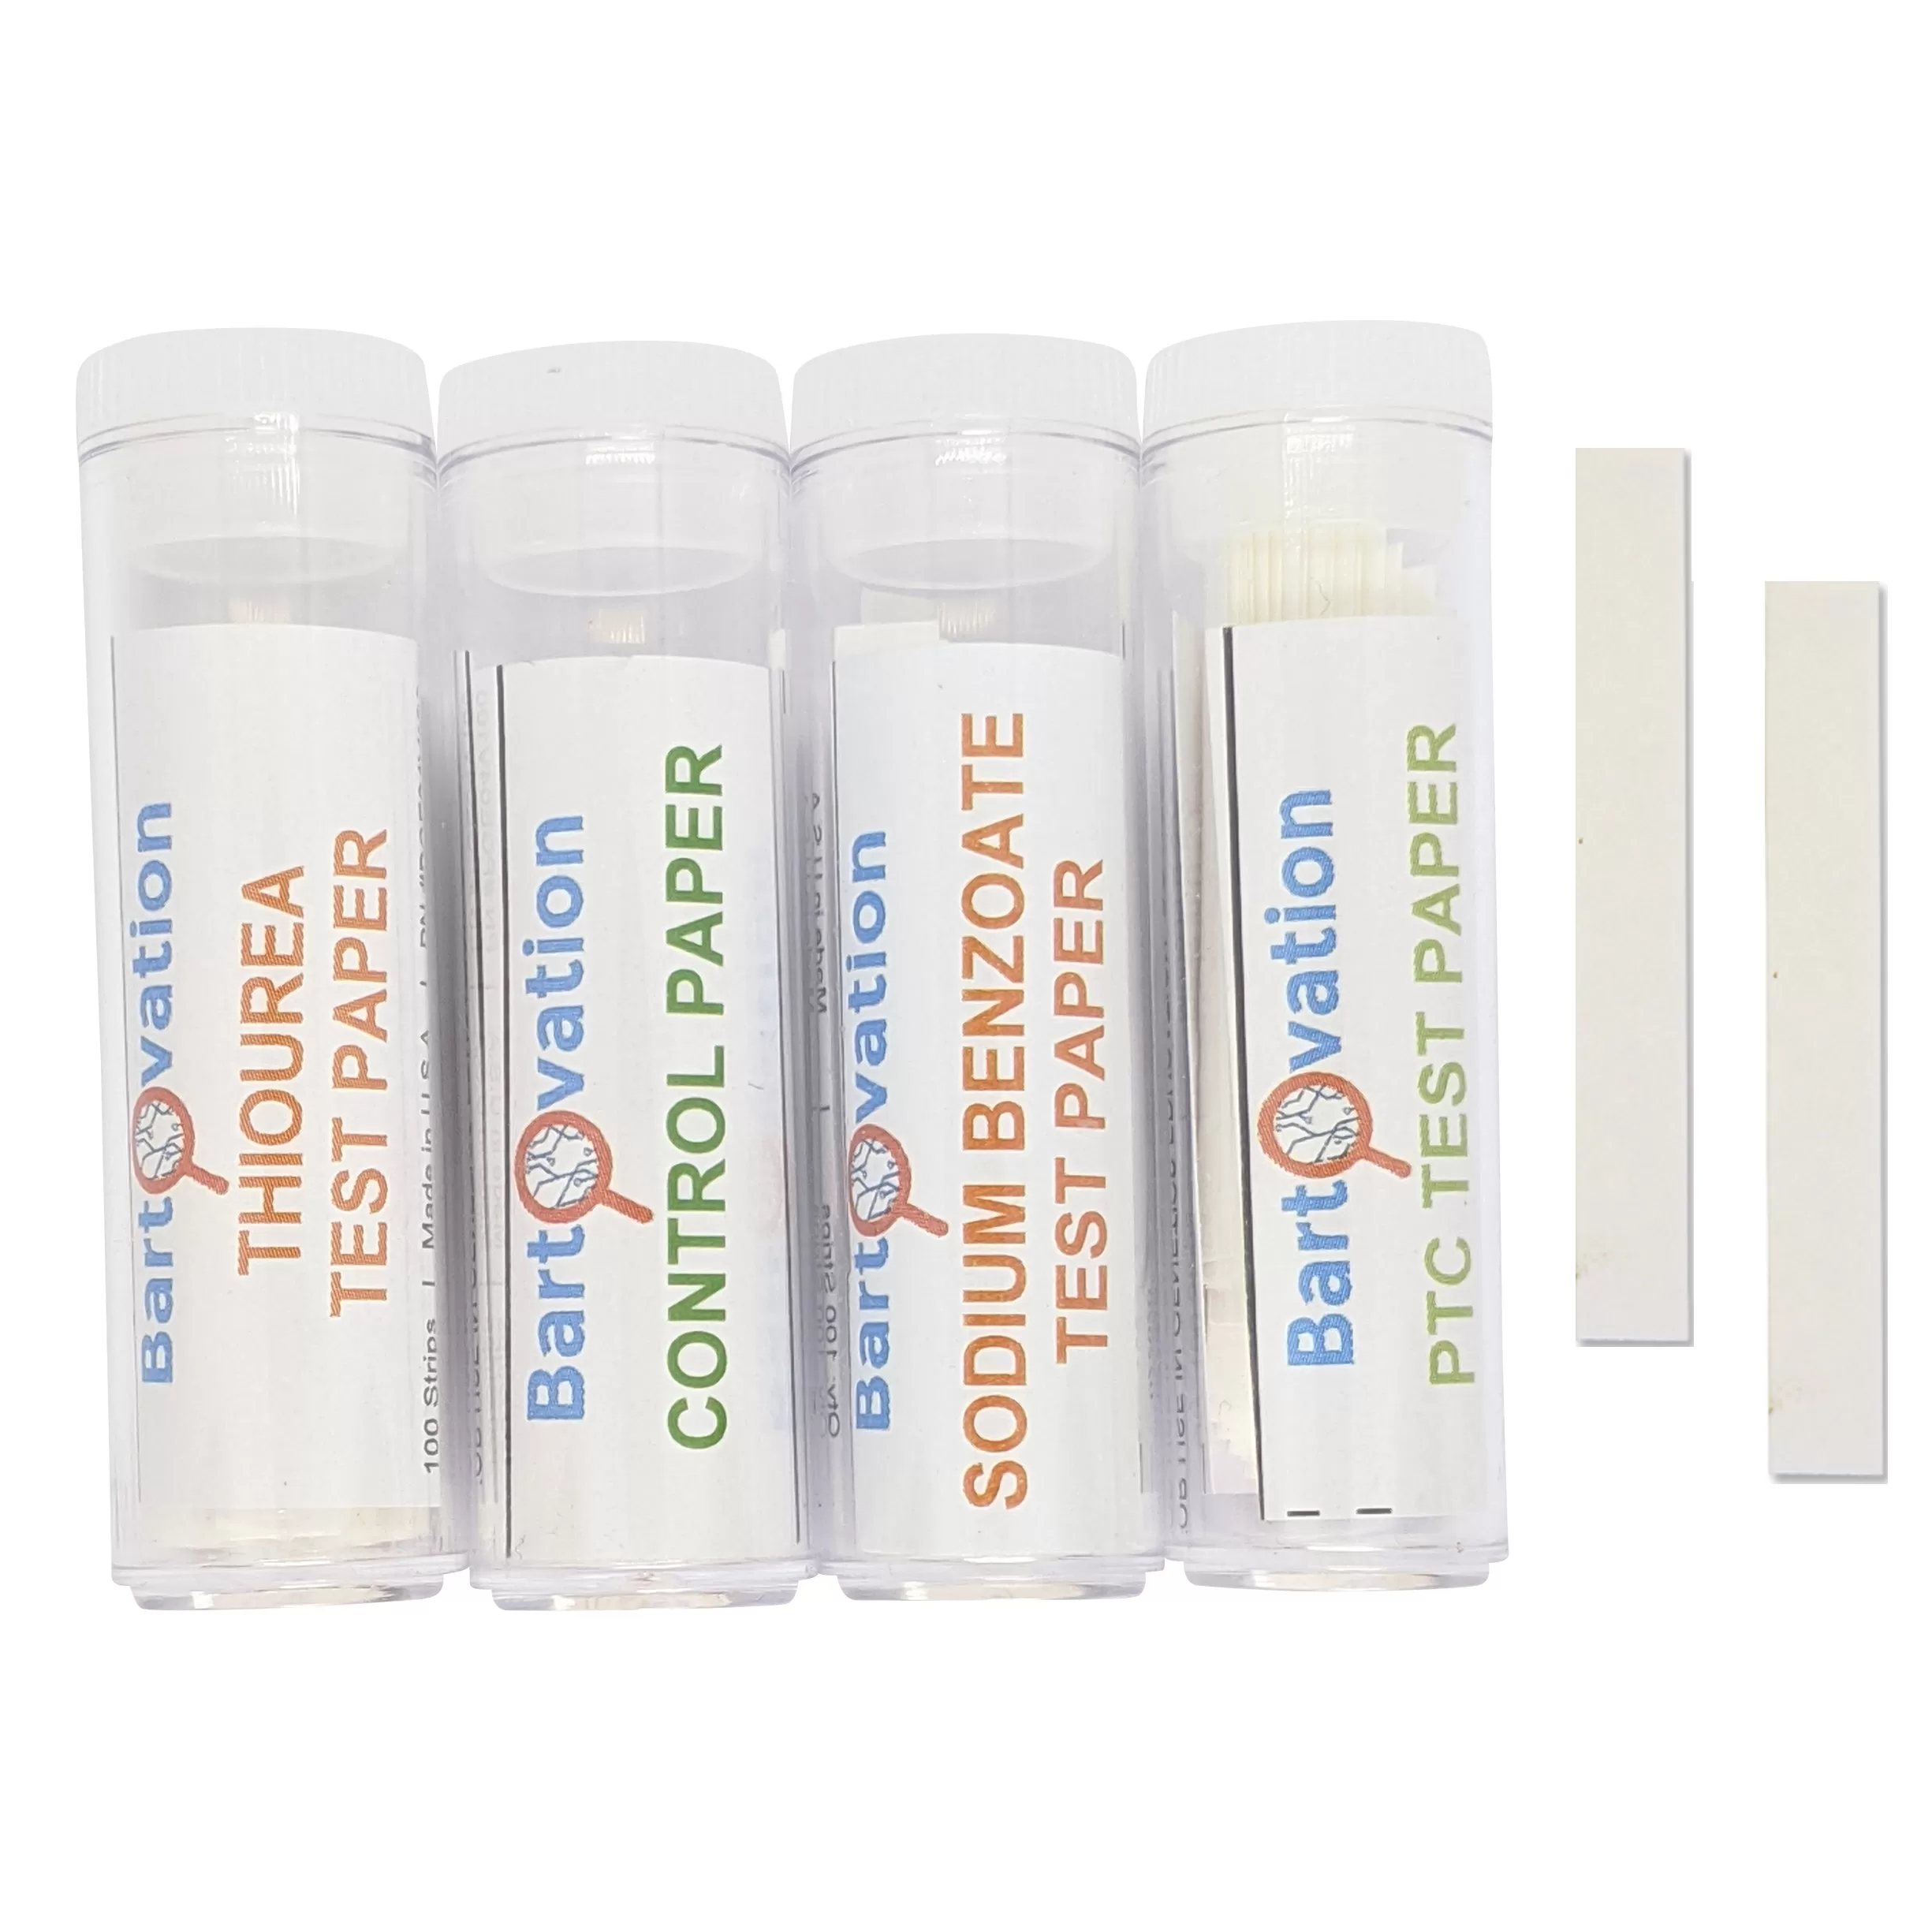 Super Taster genetic Test Lab Kit with Instructions